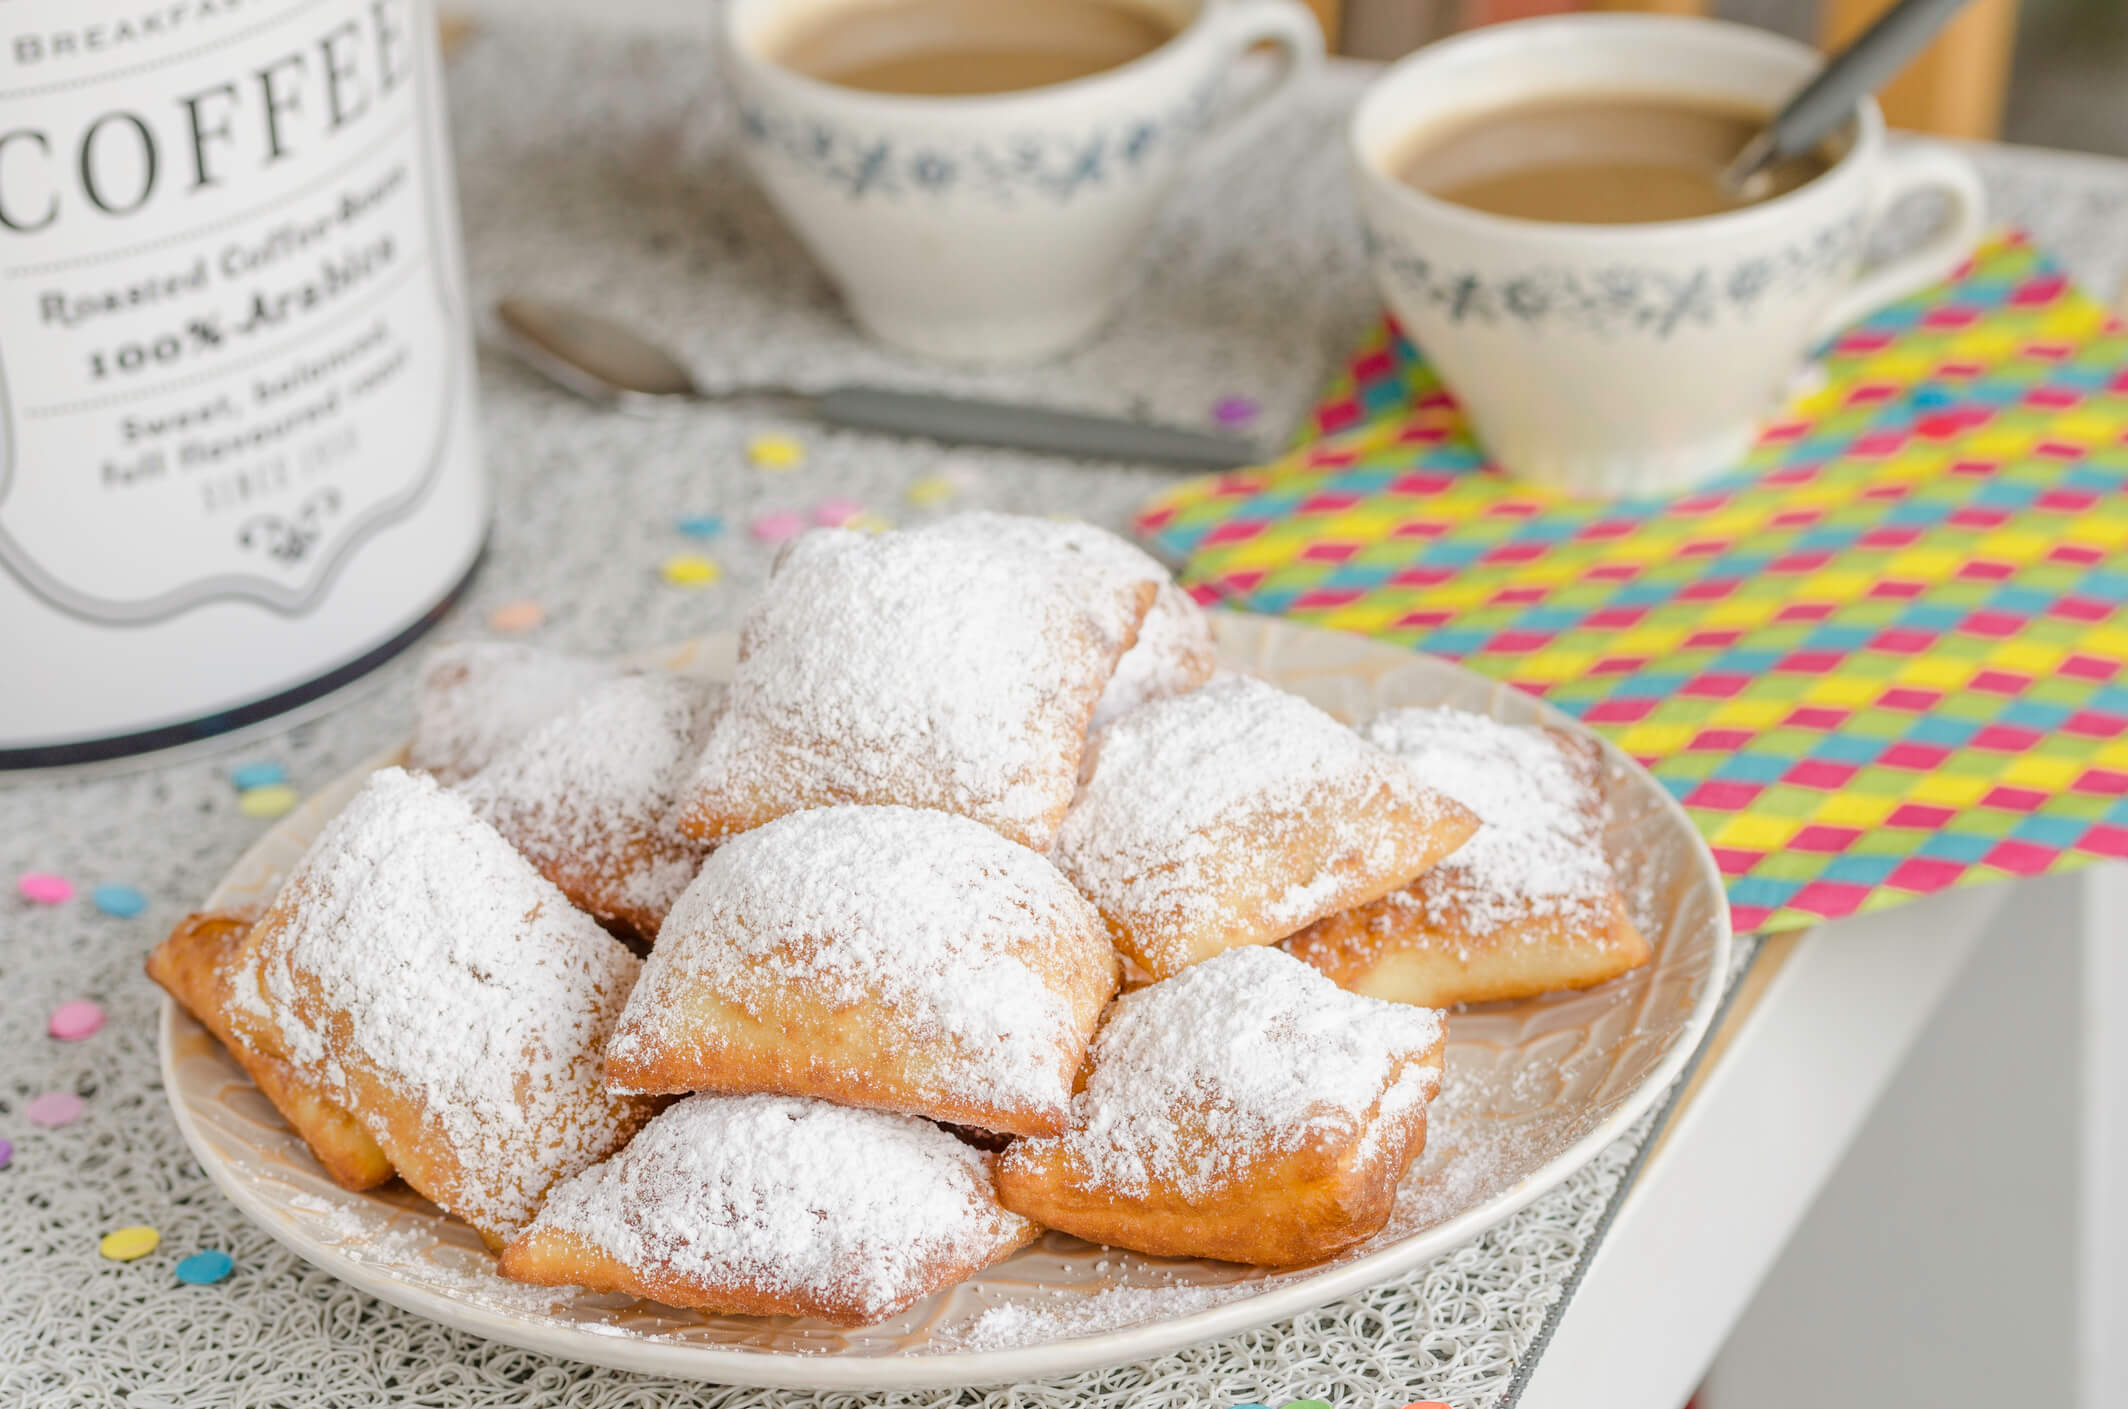 New Orleans beignets served for Mardi Gras